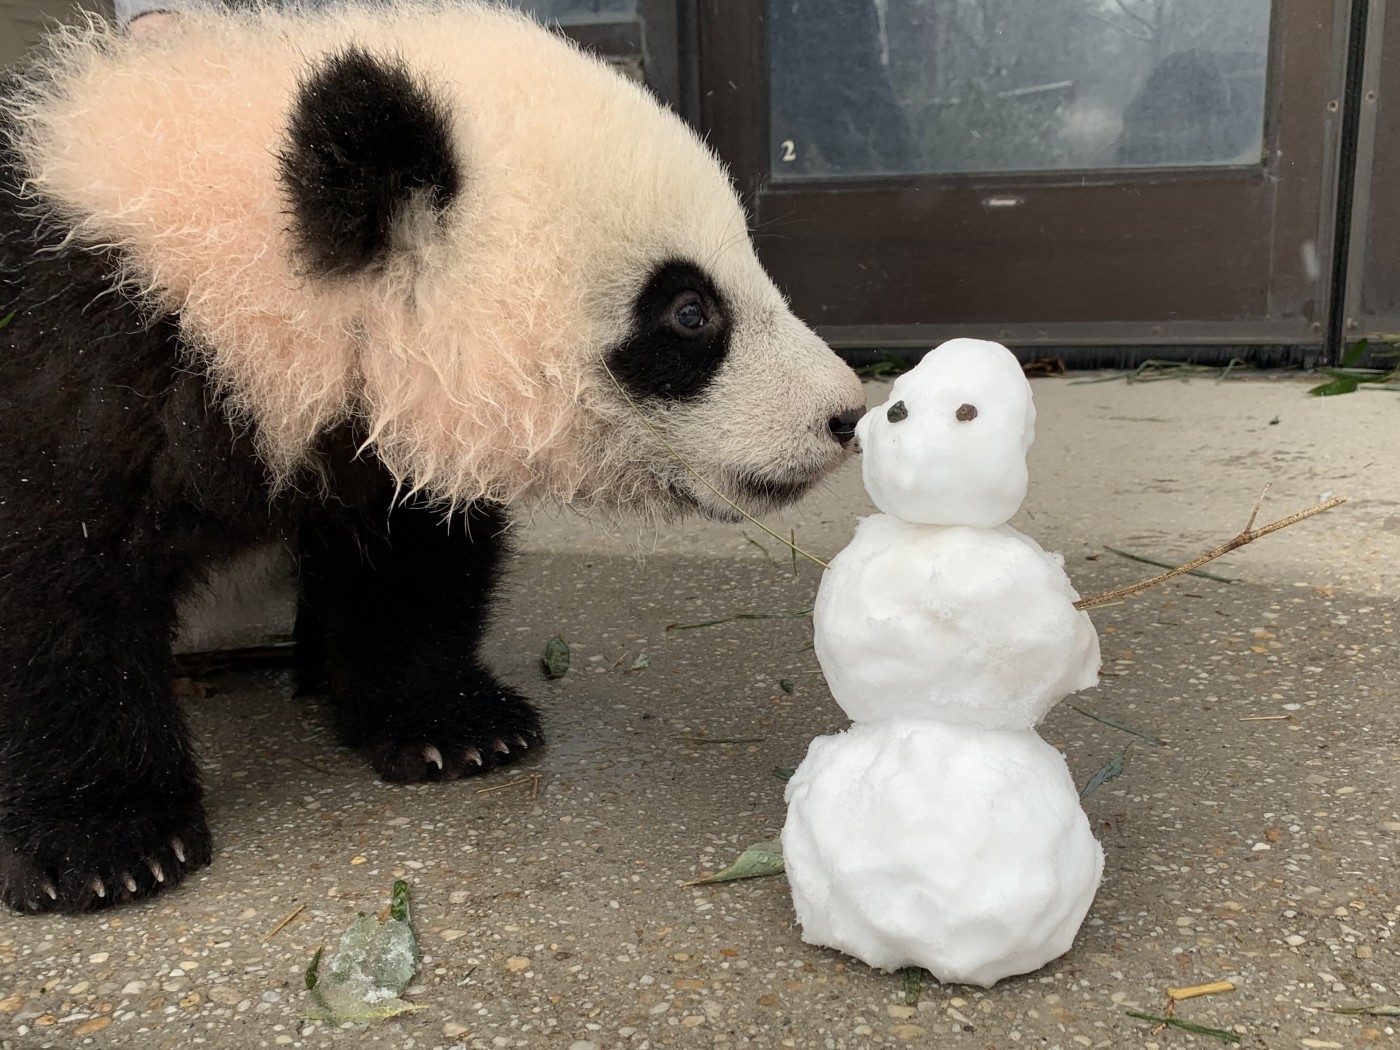 Five-month-old giant panda Xiao Qi Ji sniffs a small snowman that stands just a few inches tall.